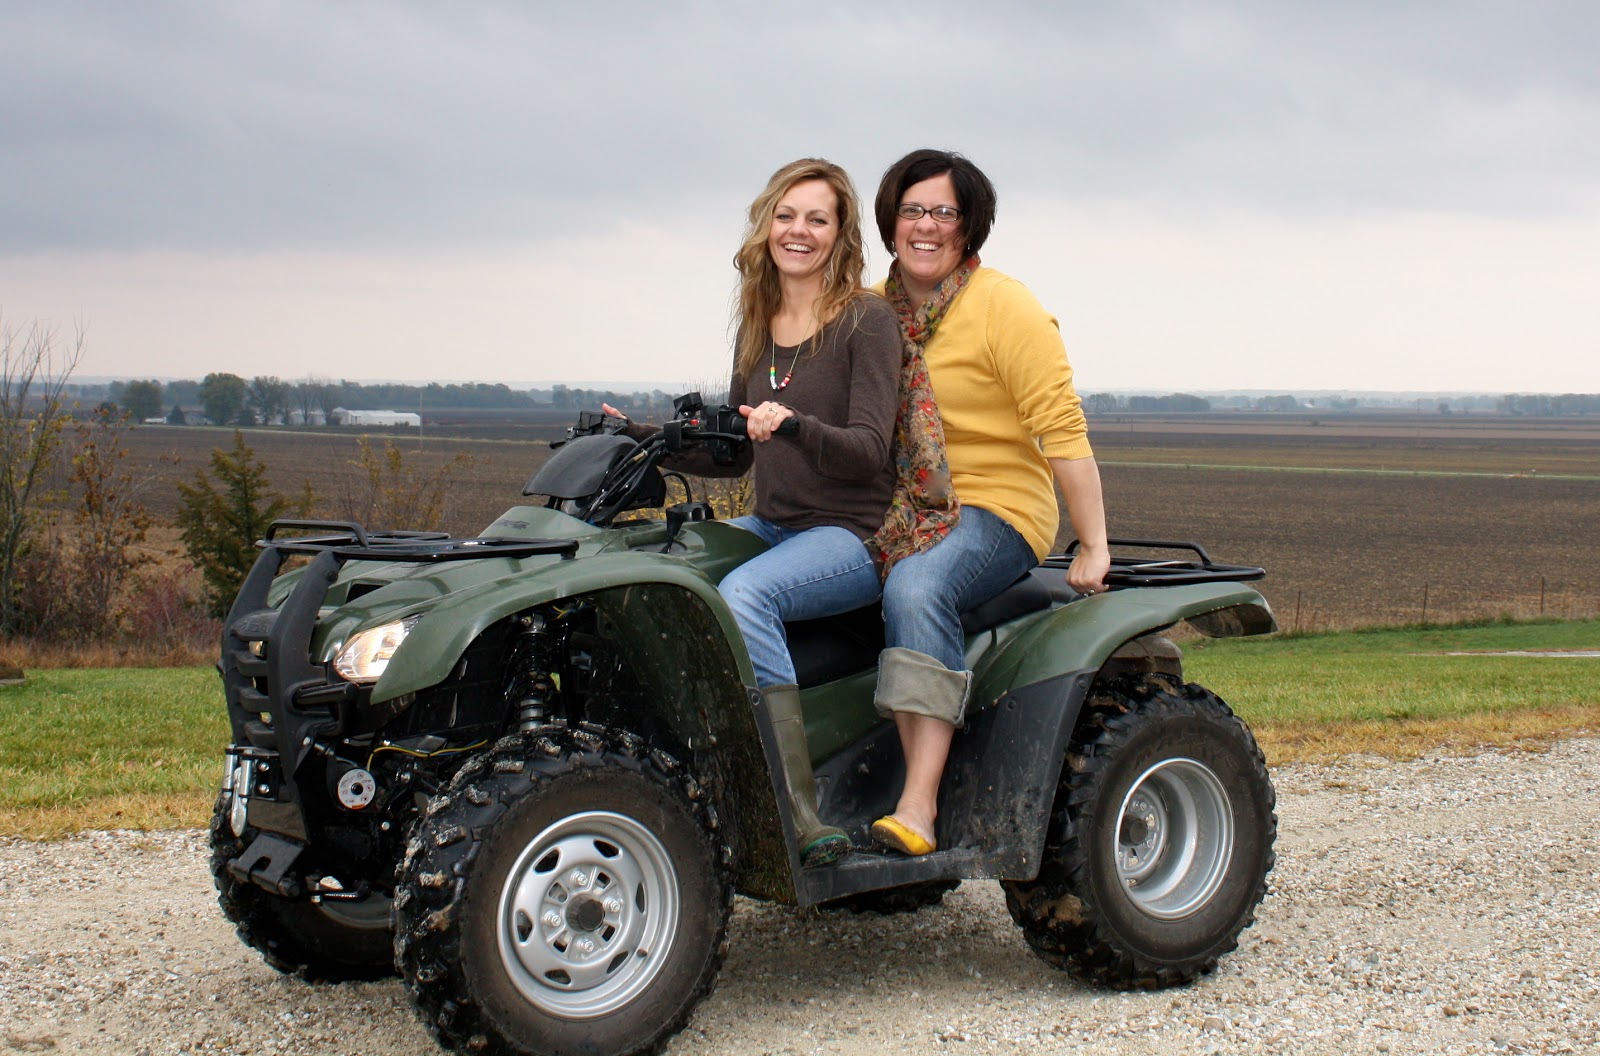 A Little Monkey Business: friends, four wheelers and fun!